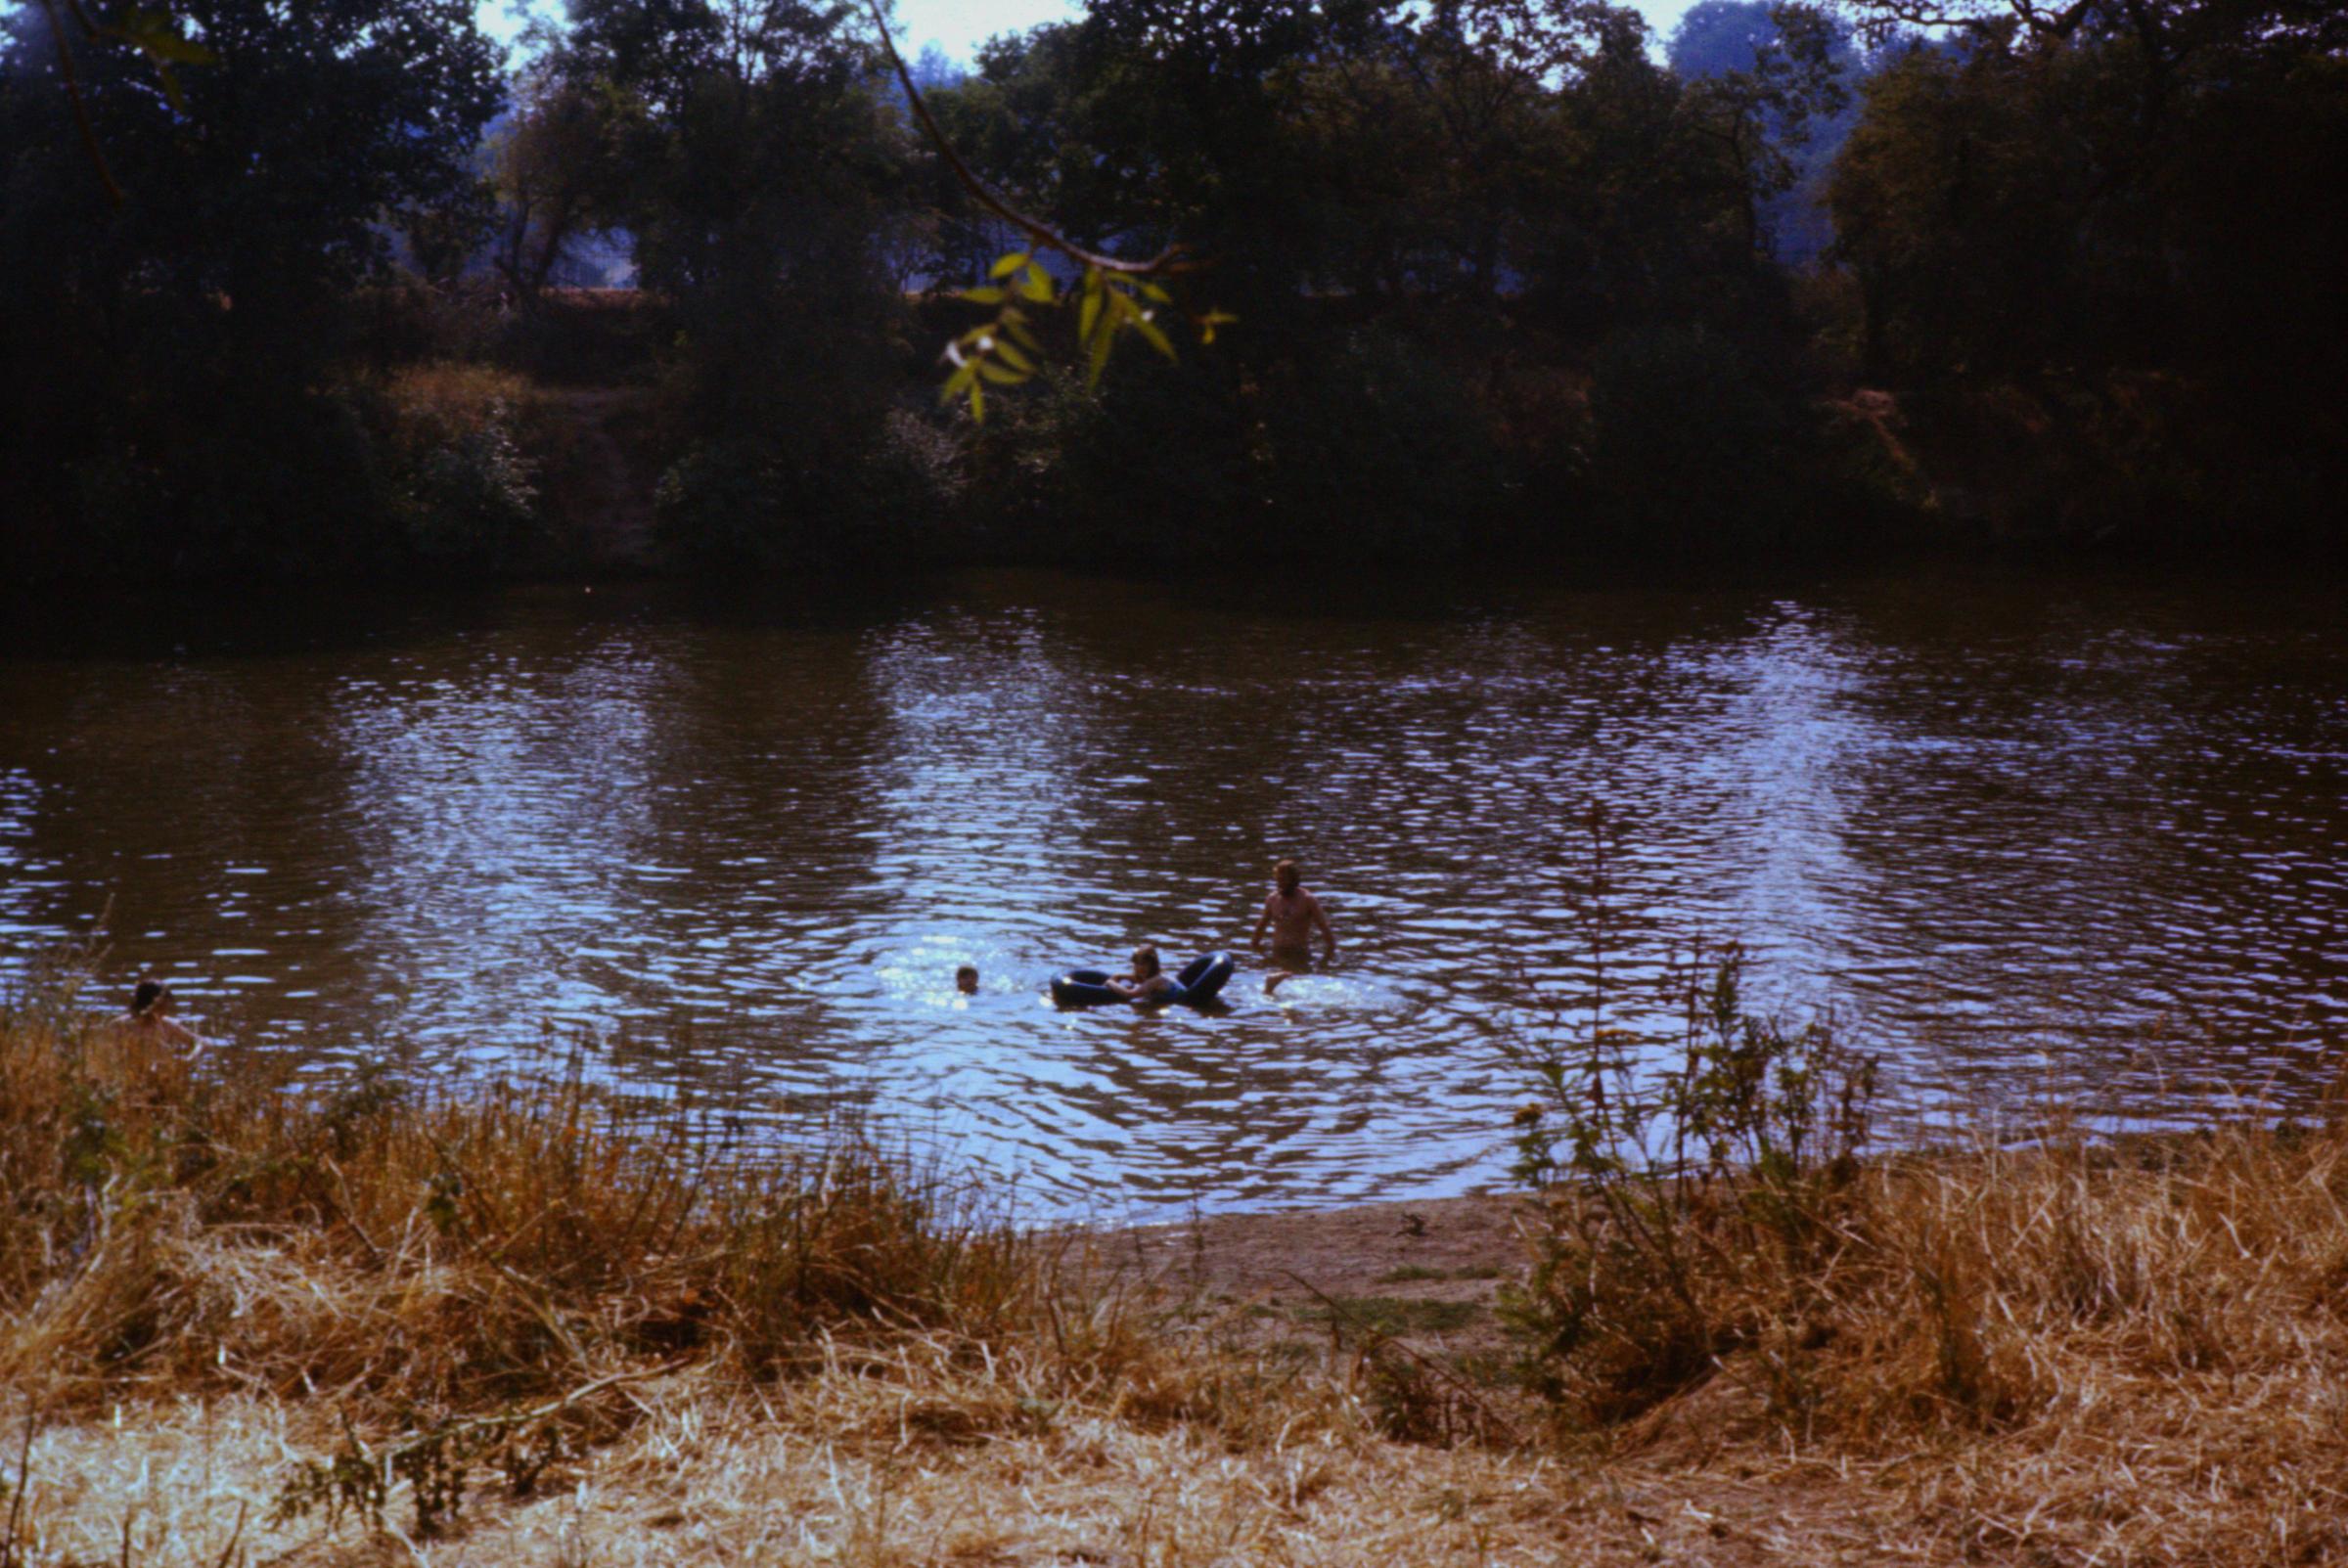 Swimming at The Slip in the 1970s